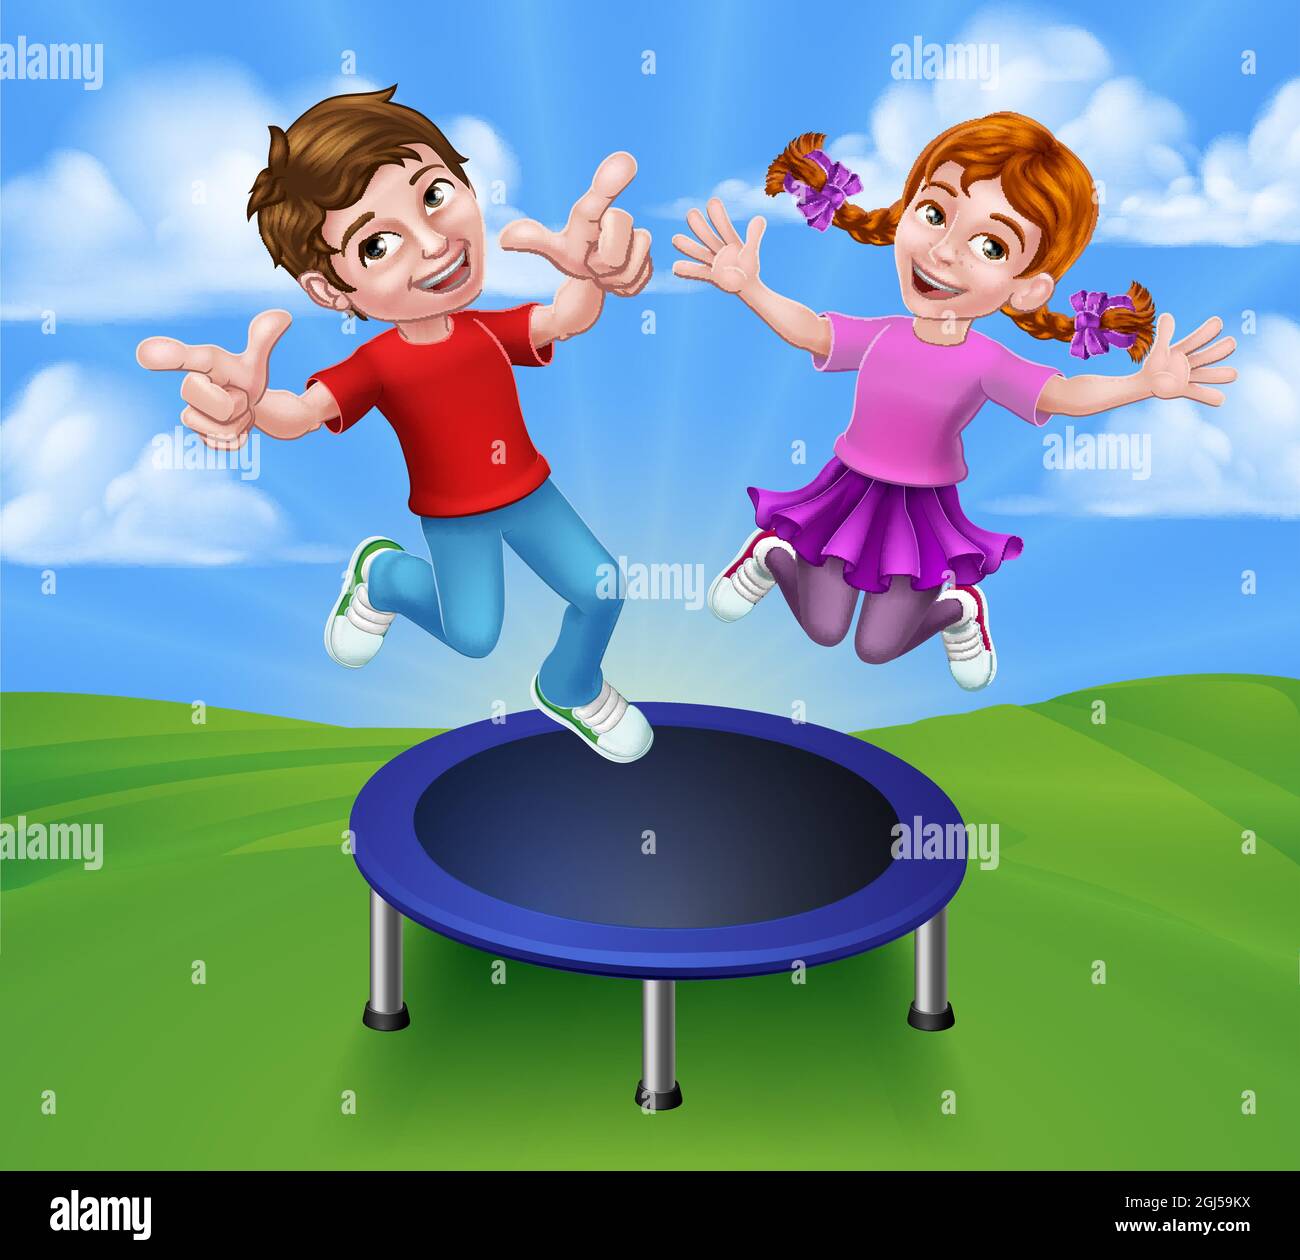 Kids Jumping On A Round Cartoon Trampoline Stock Vector